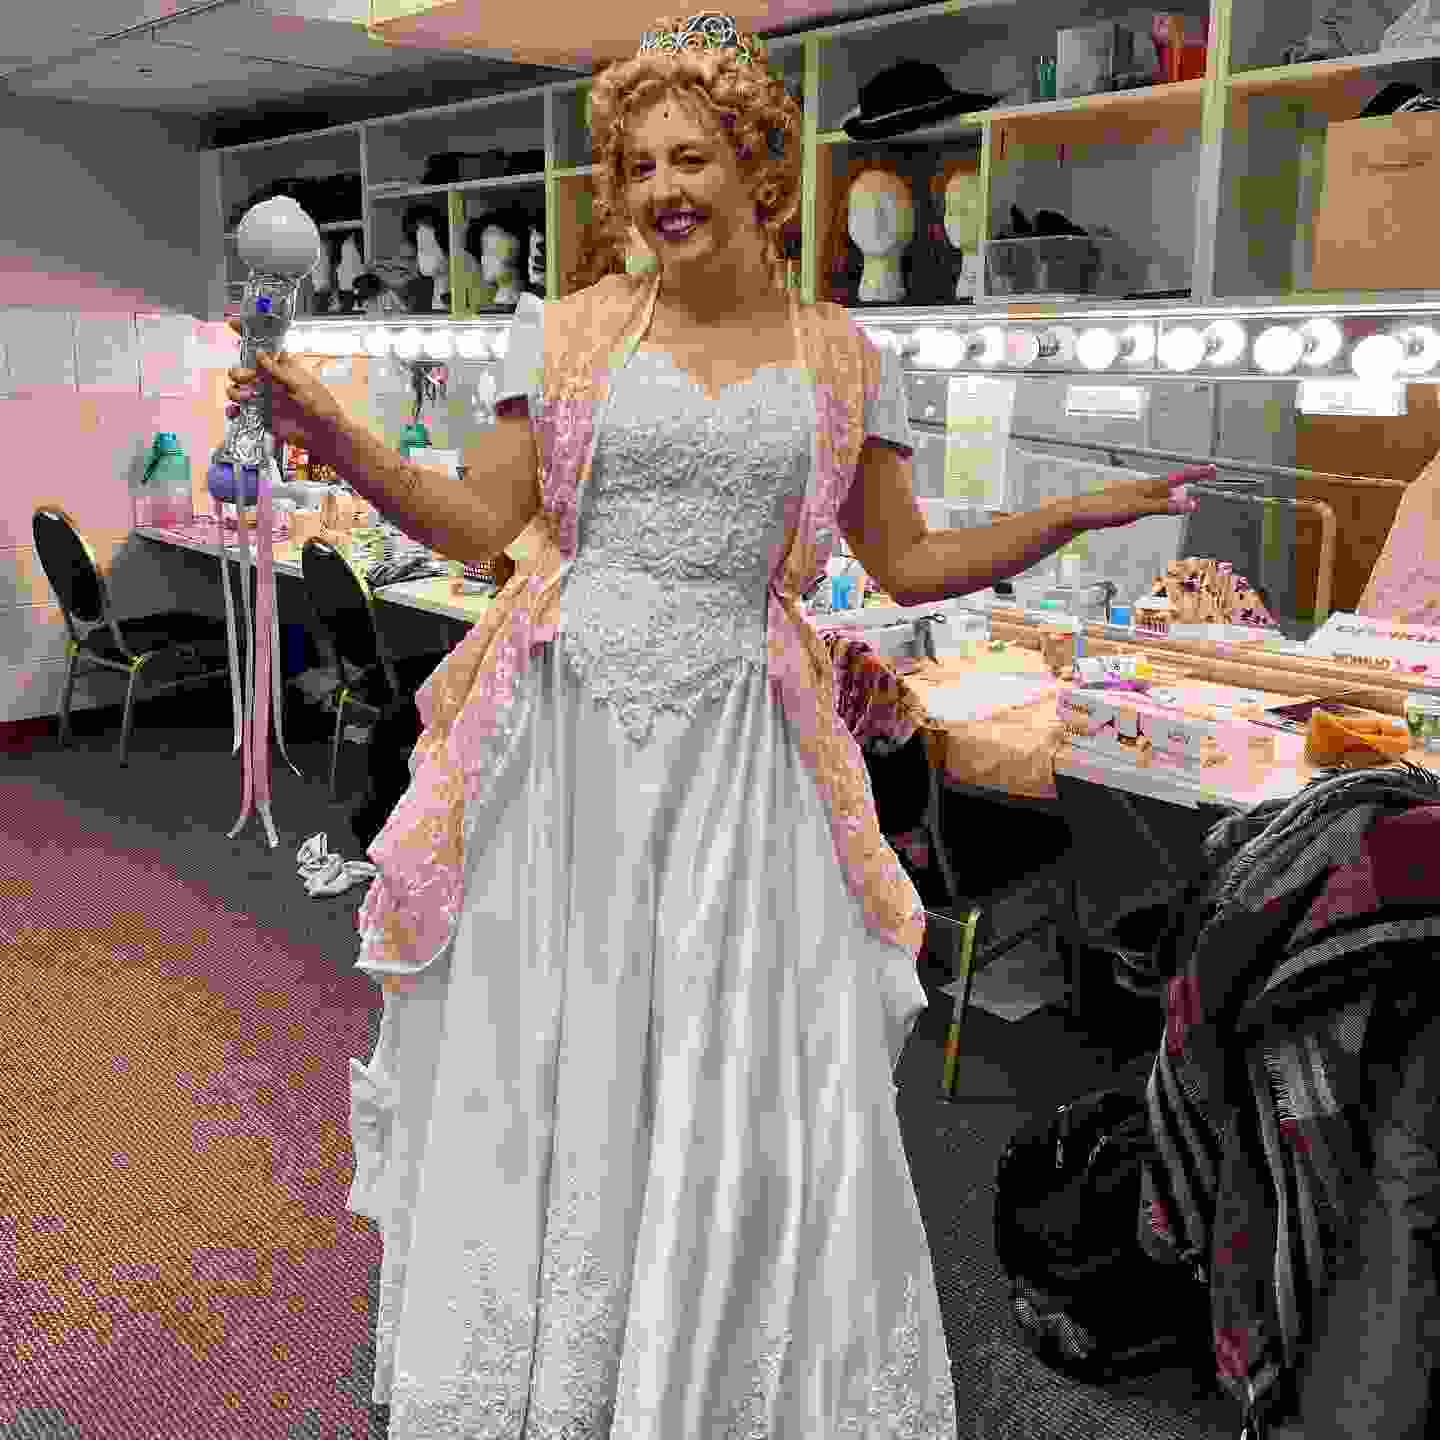 Glinda the Good Witch in "The Wizard of Oz" (Marriott Theatre, 2022)